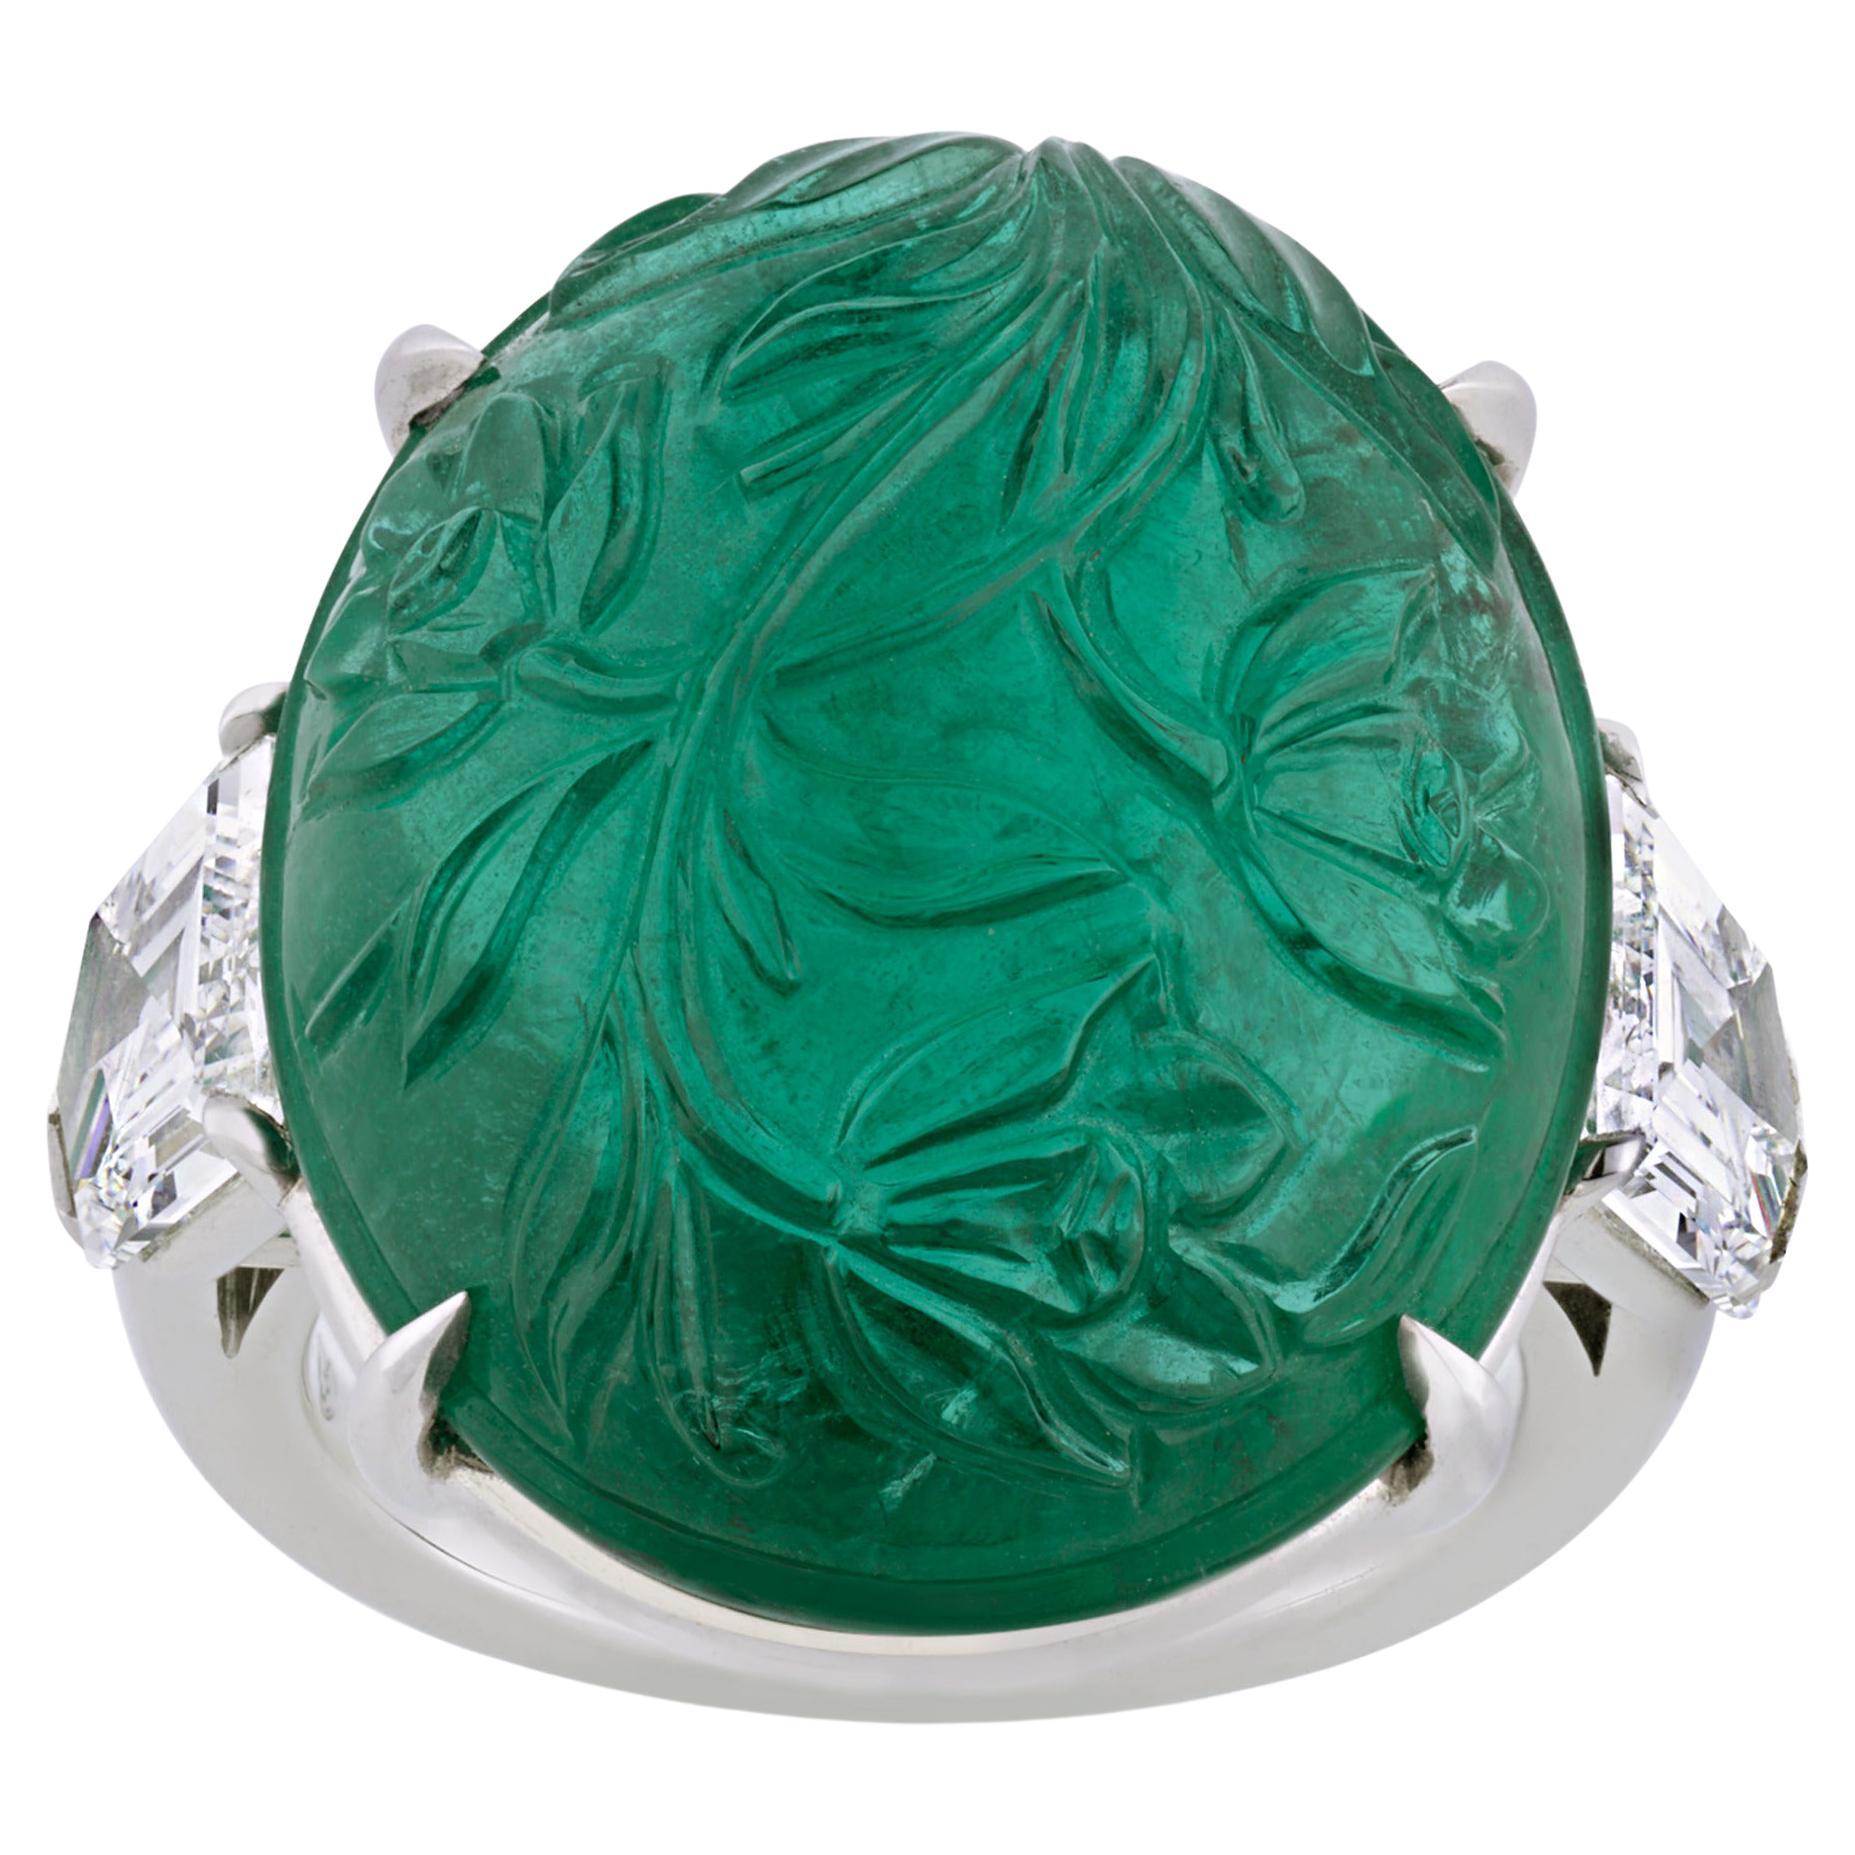 Carved Zambian Emerald Ring, 24.05 Carats